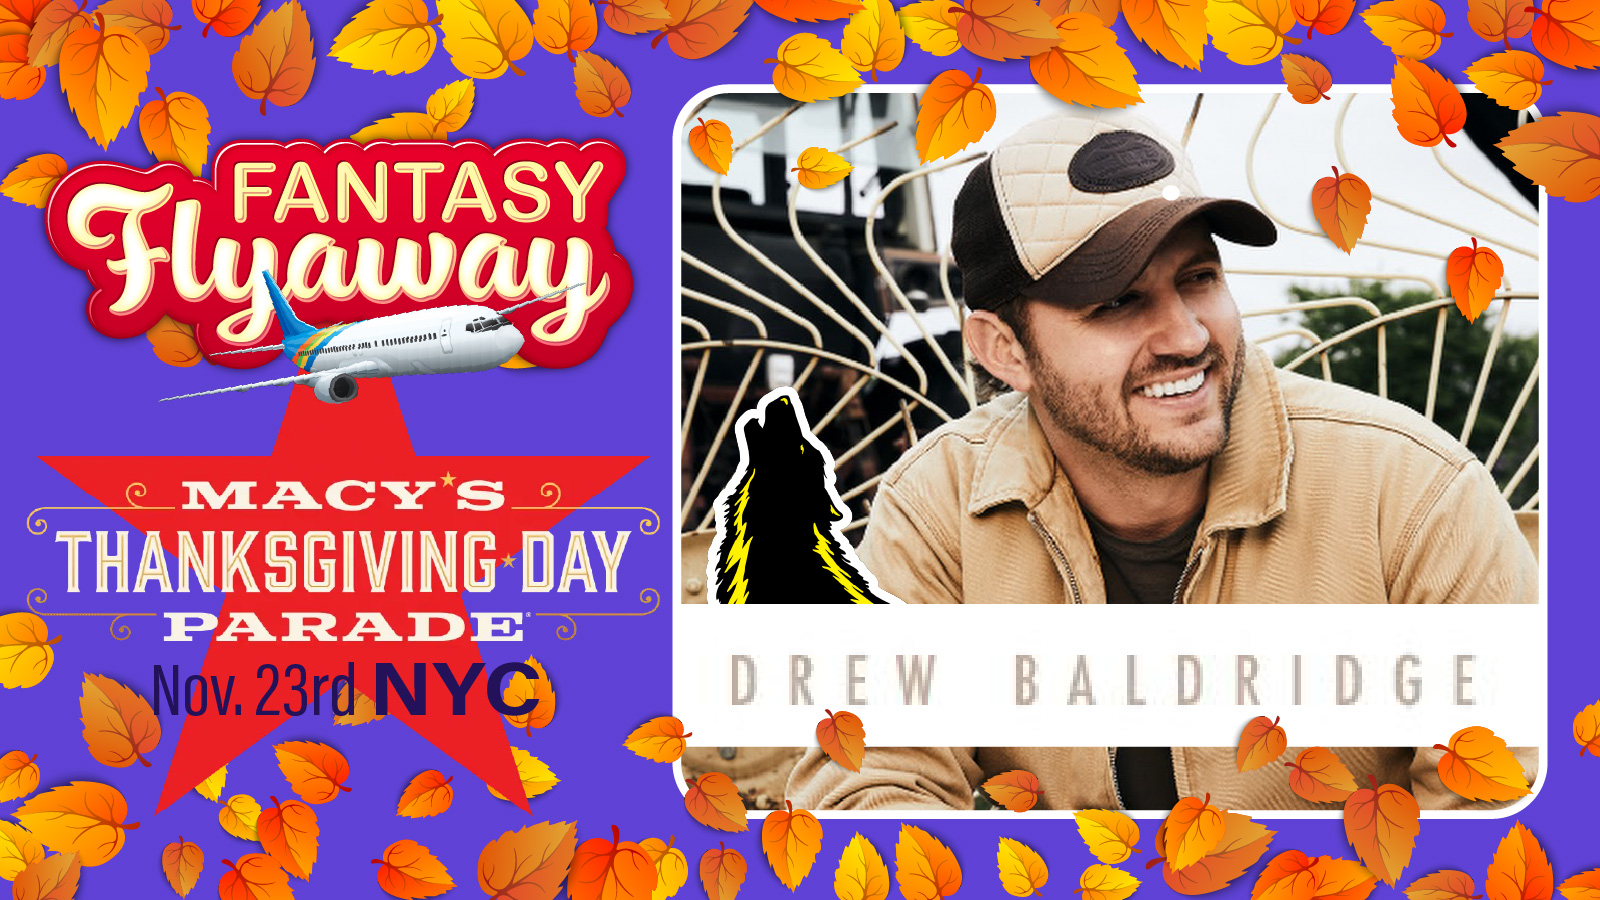 Win a Fantasy Flyaway to the Macy’s Thanksgiving Day Parade!